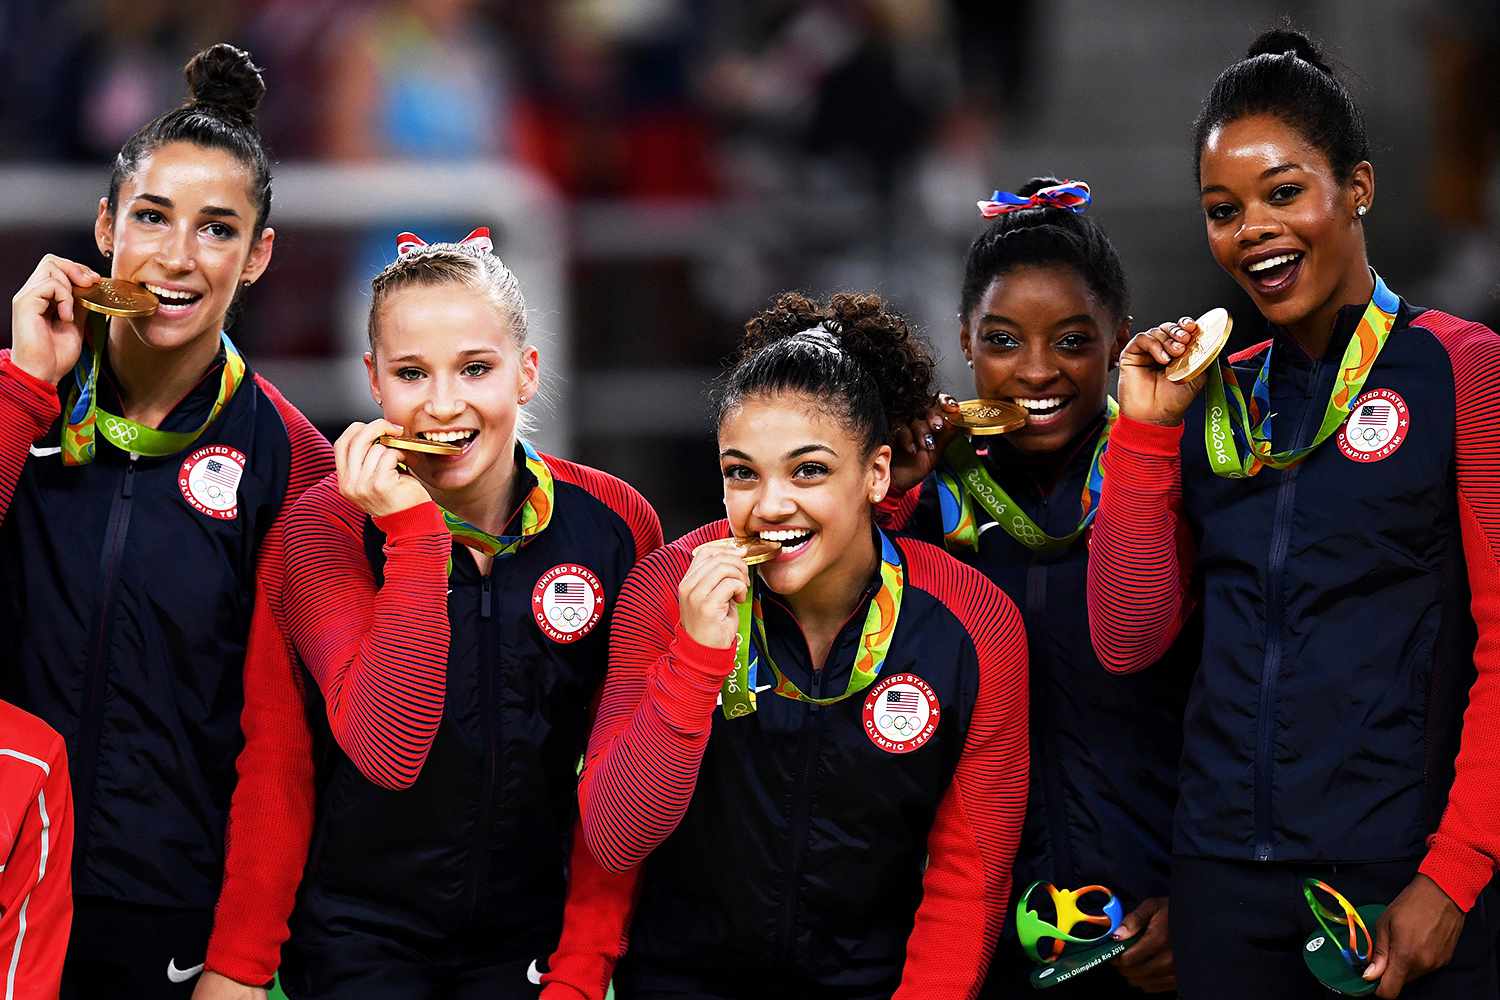 Gold medalists Alexandra Raisman, Madison Kocian, Lauren Hernandez, Simone Biles and Gabrielle Douglas of the United States pose for photographs on the podium at the medal ceremony for the Artistic Gymnastics Women's Team on Day 4 of the Rio 2016 Olympic Games at the Rio Olympic Arena on August 9, 2016 in Rio de Janeiro, Brazil.